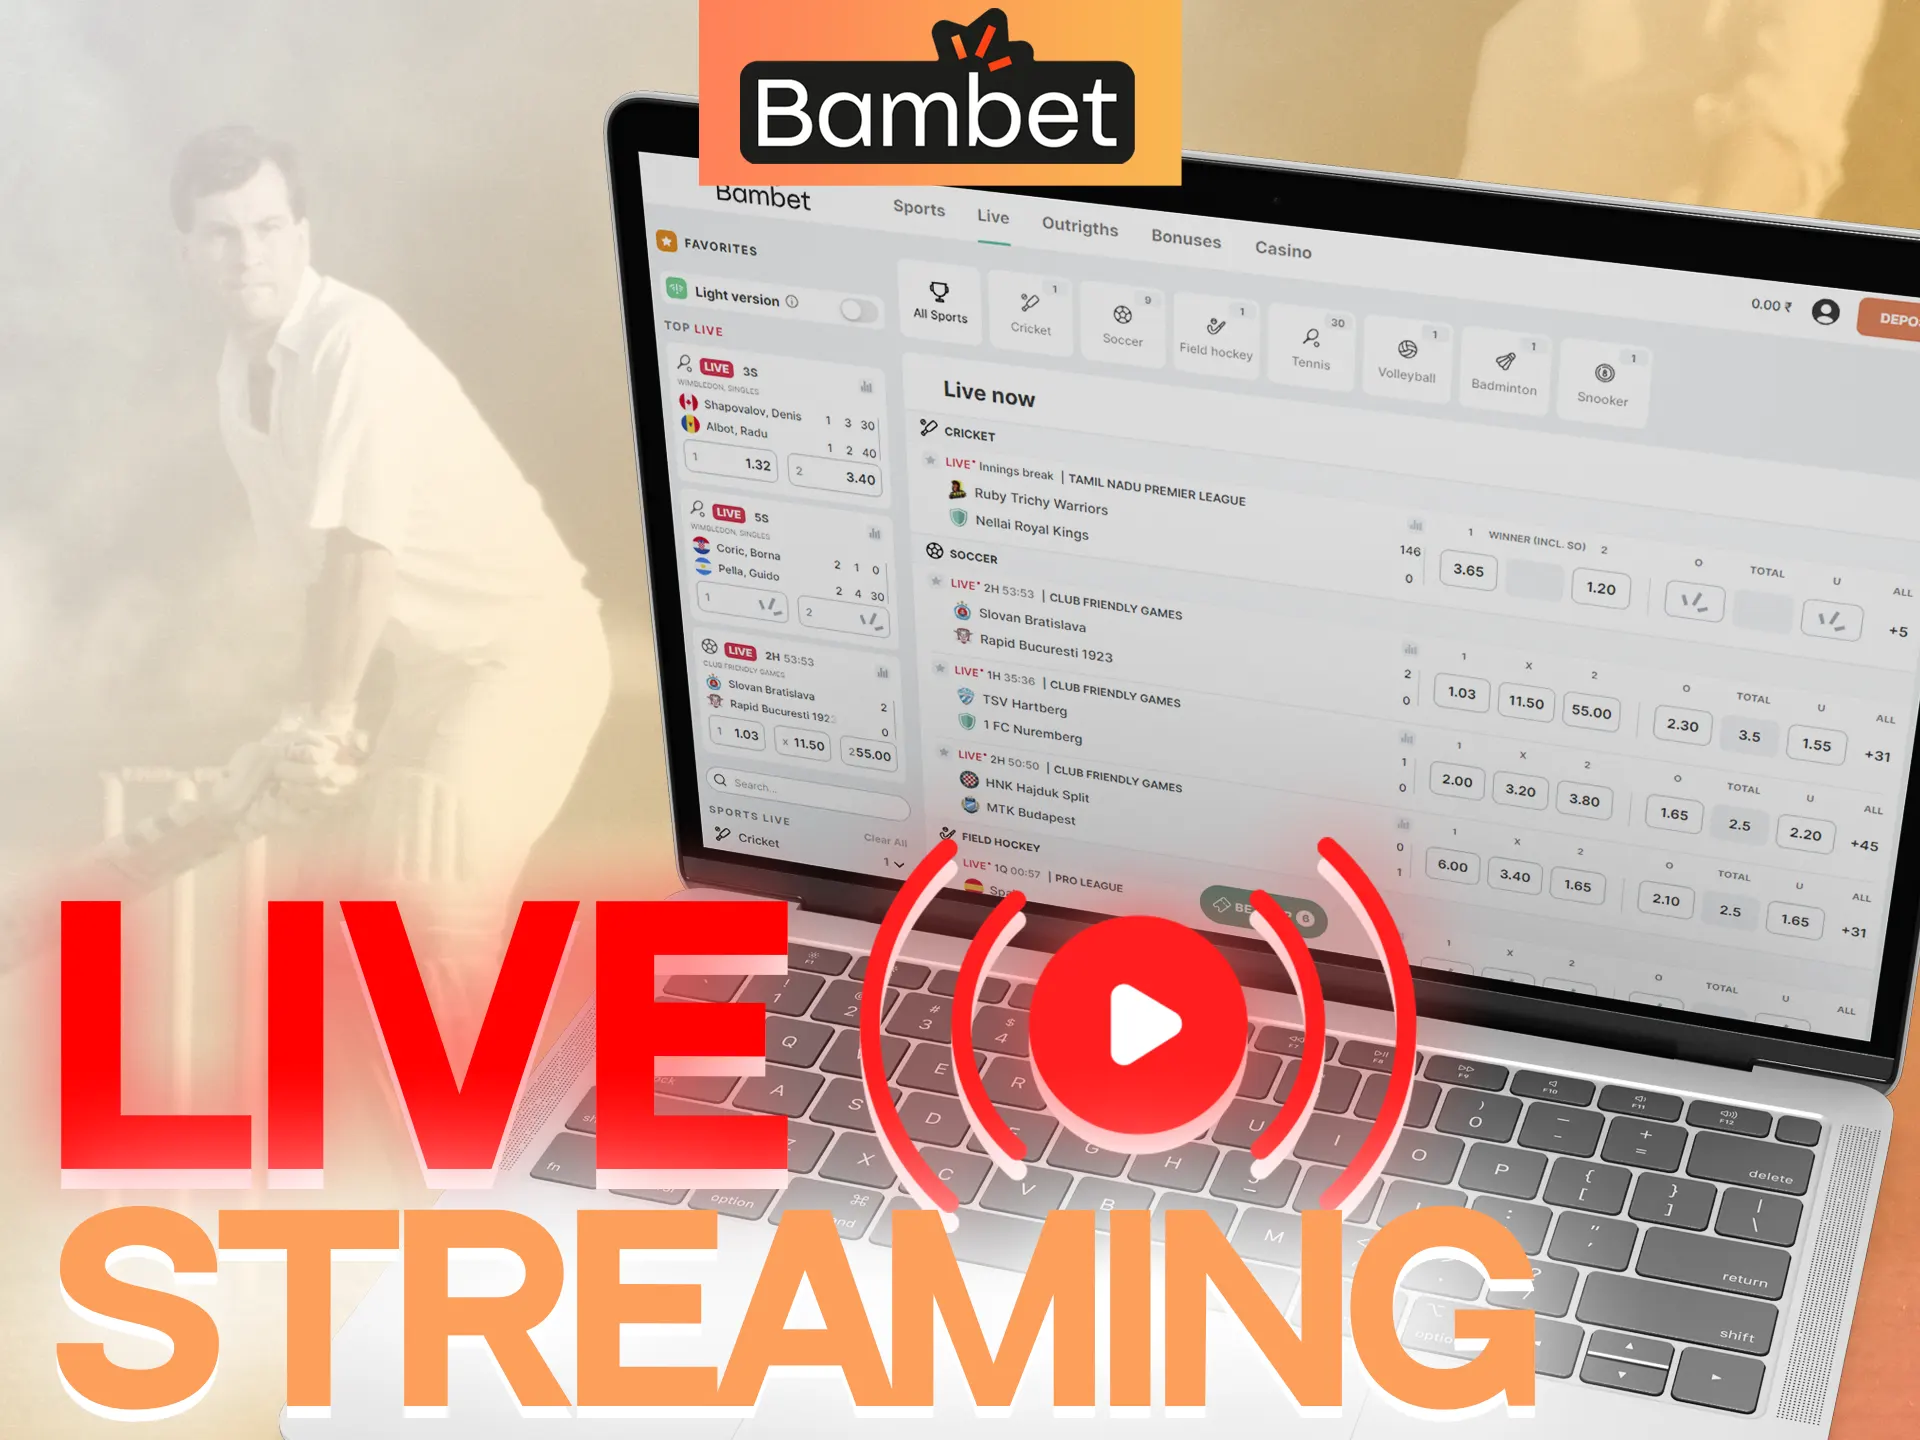 On Bambet keep an eye on the games as the live streaming goes on.